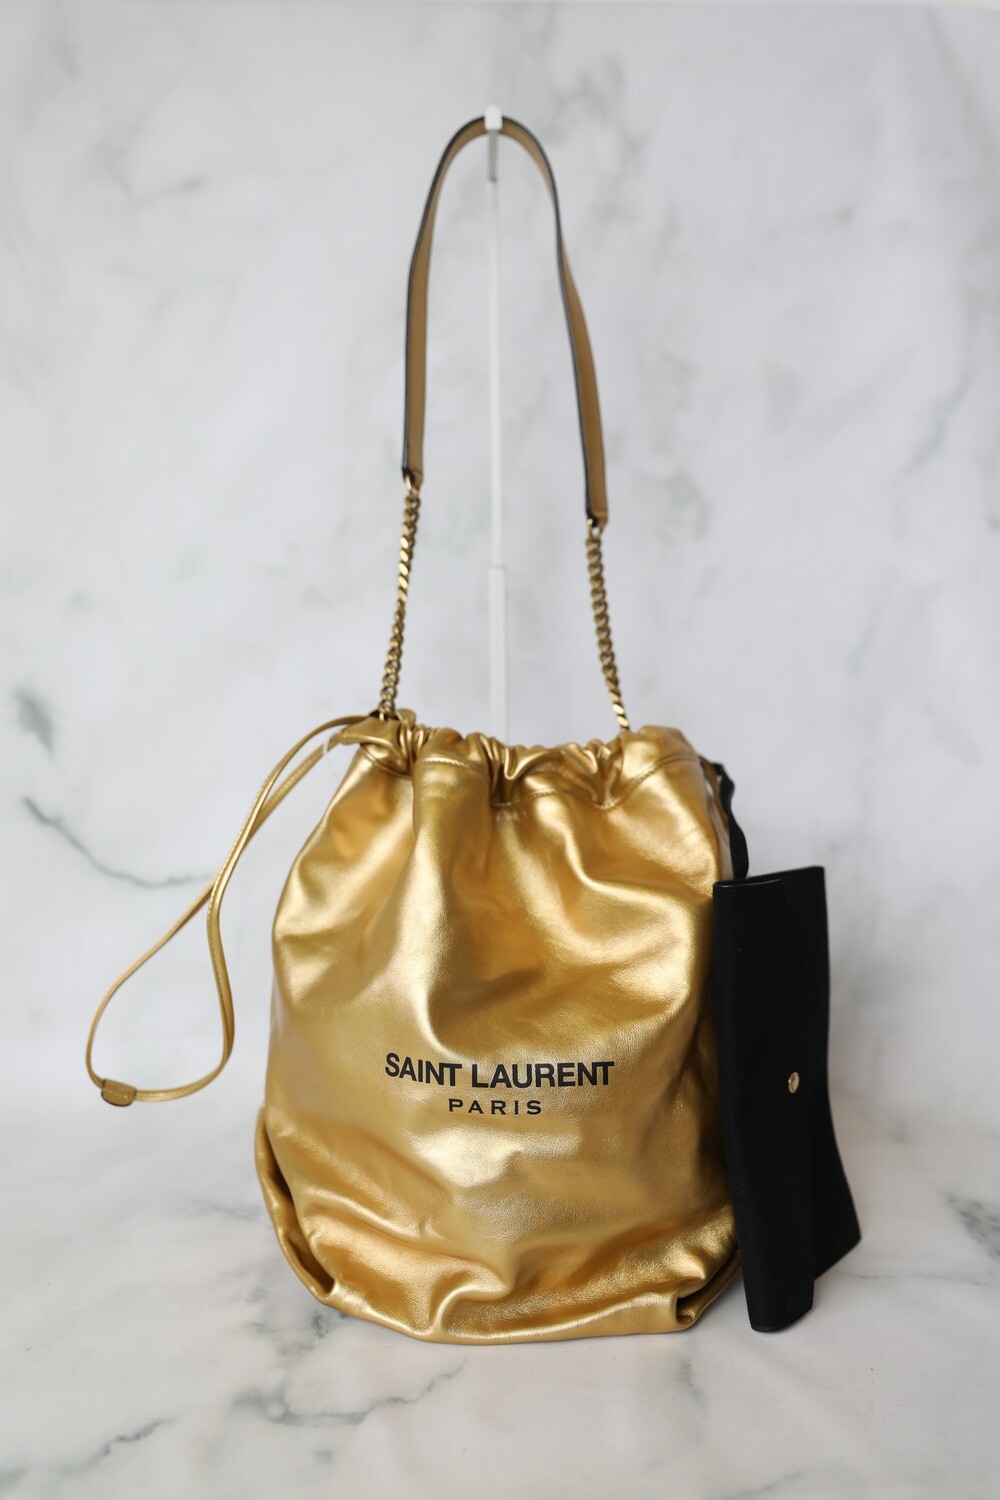 Saint Laurent Teddy Bucket Drawstring Tote Bag, Metallic Gold with Gold Hardware, As New in Dustbag WA001